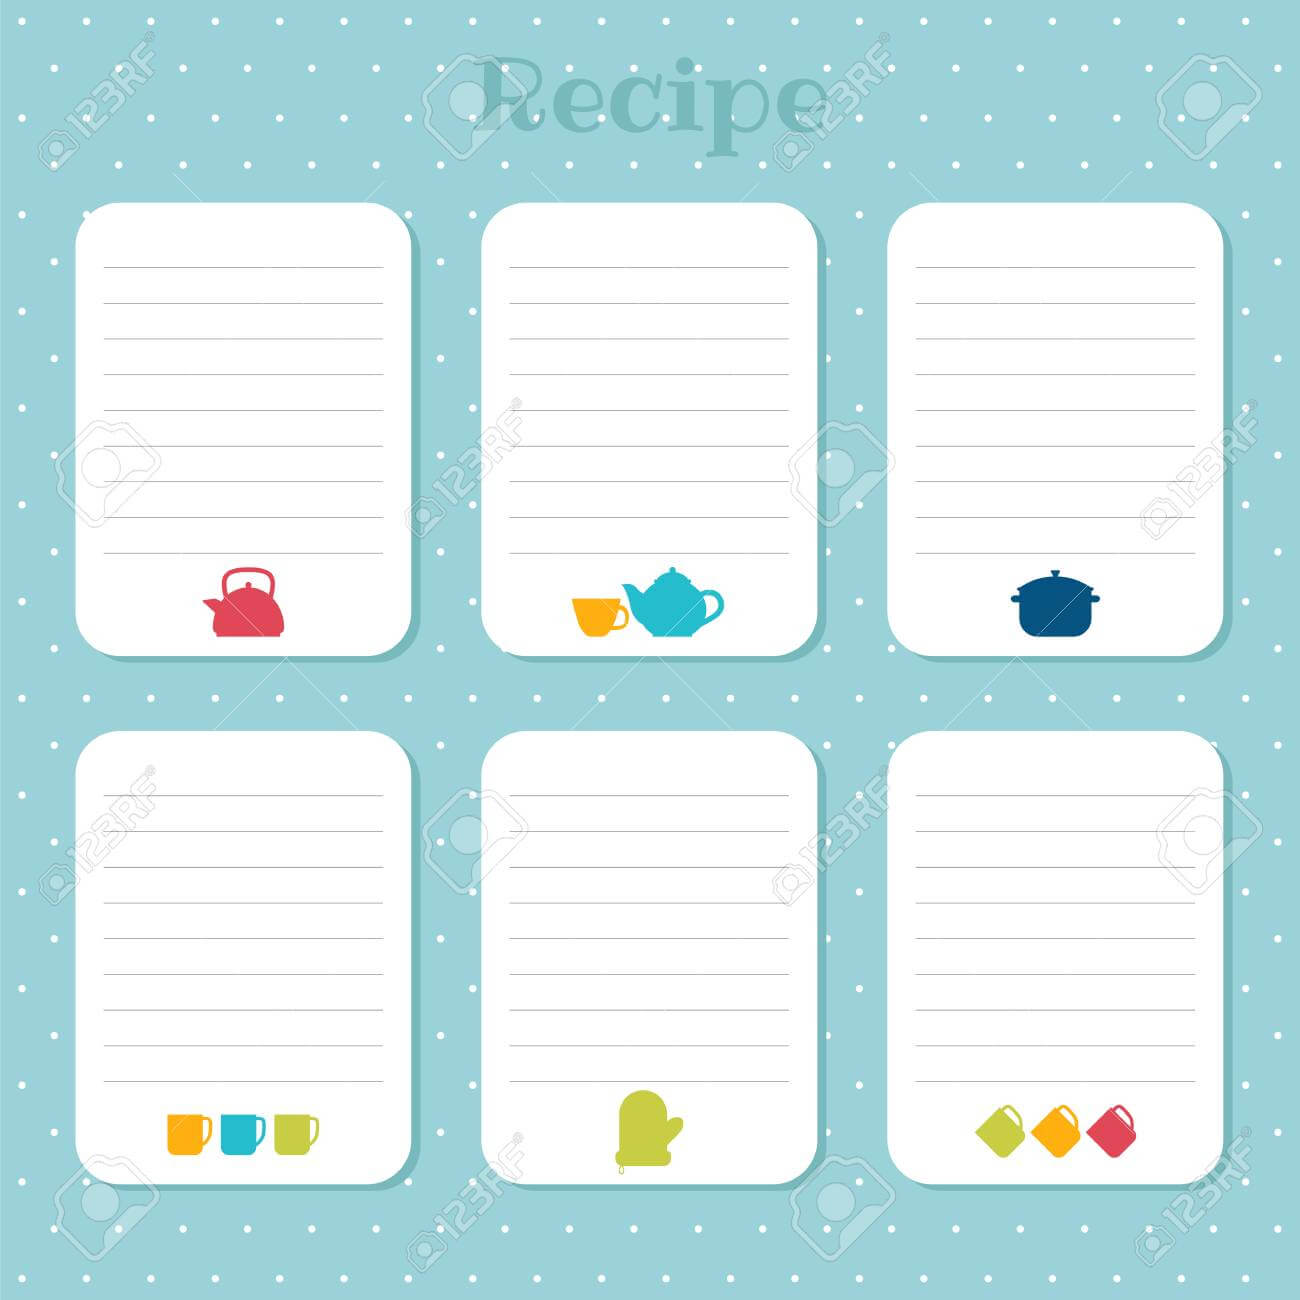 Recipe Cards Set. Cooking Card Templates. For Restaurant, Cafe,.. For Restaurant Recipe Card Template